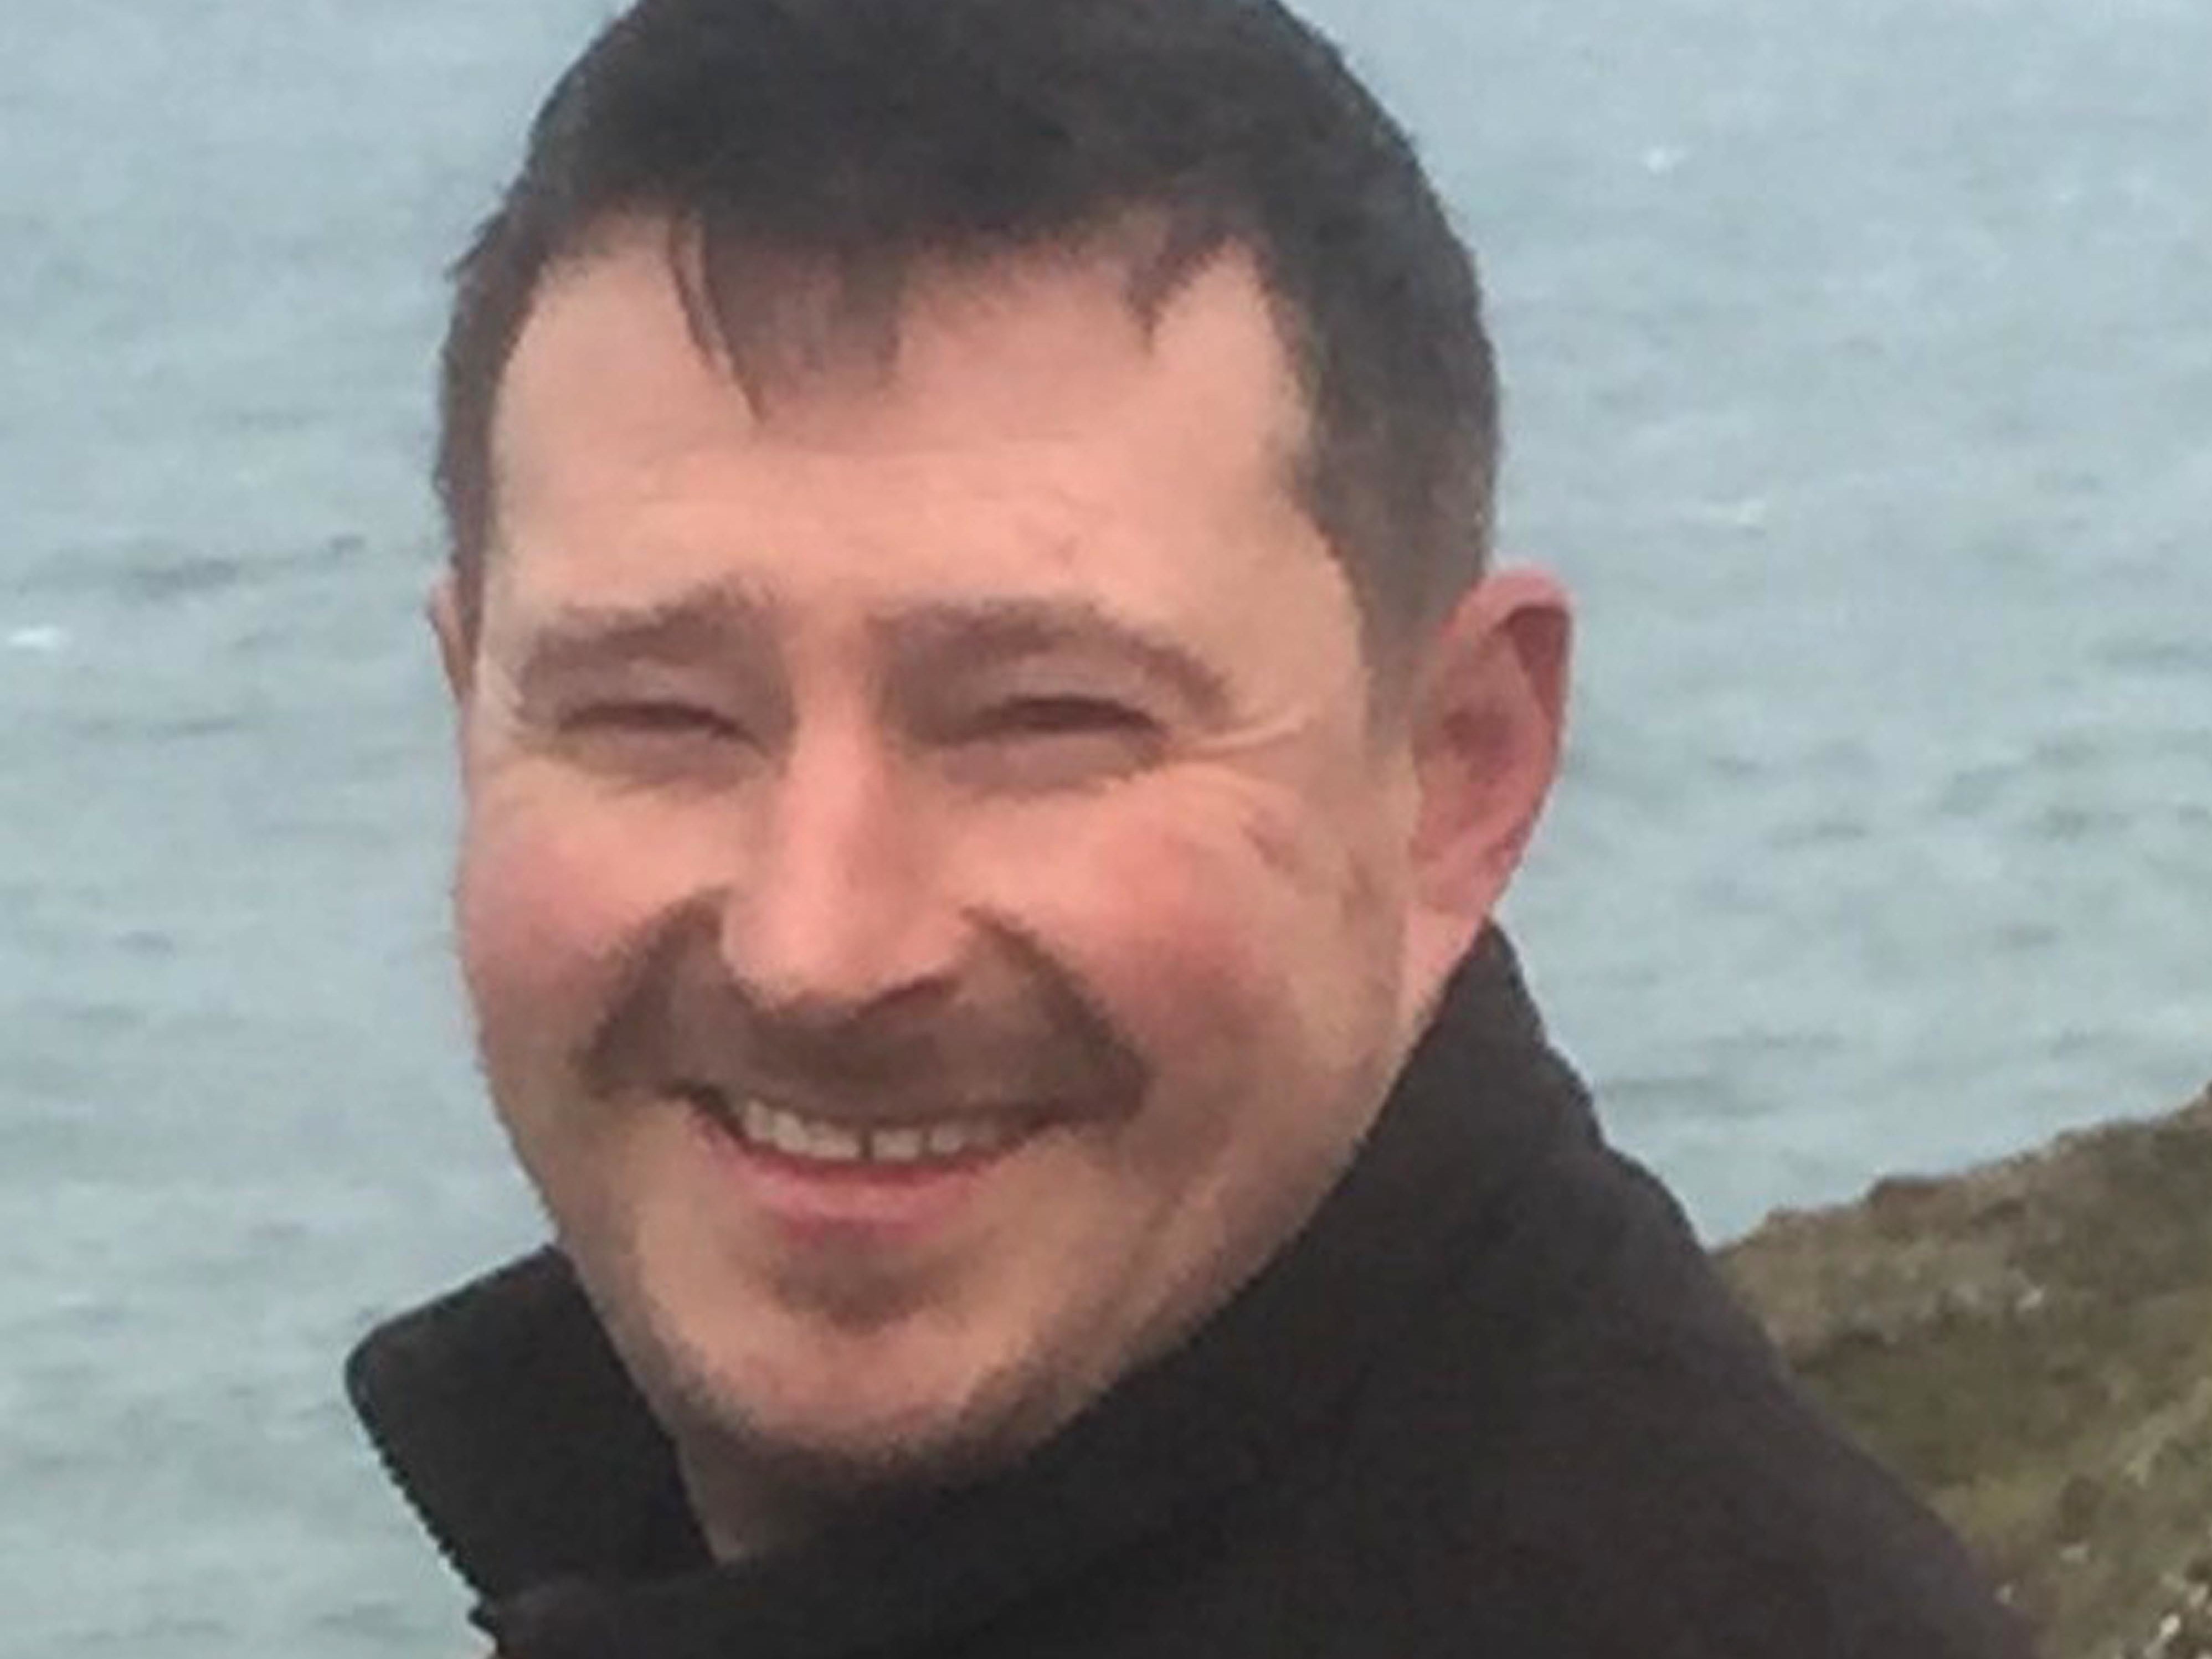 Hywel Morgan (pictured) died after rescuing a group of children caught in a riptide